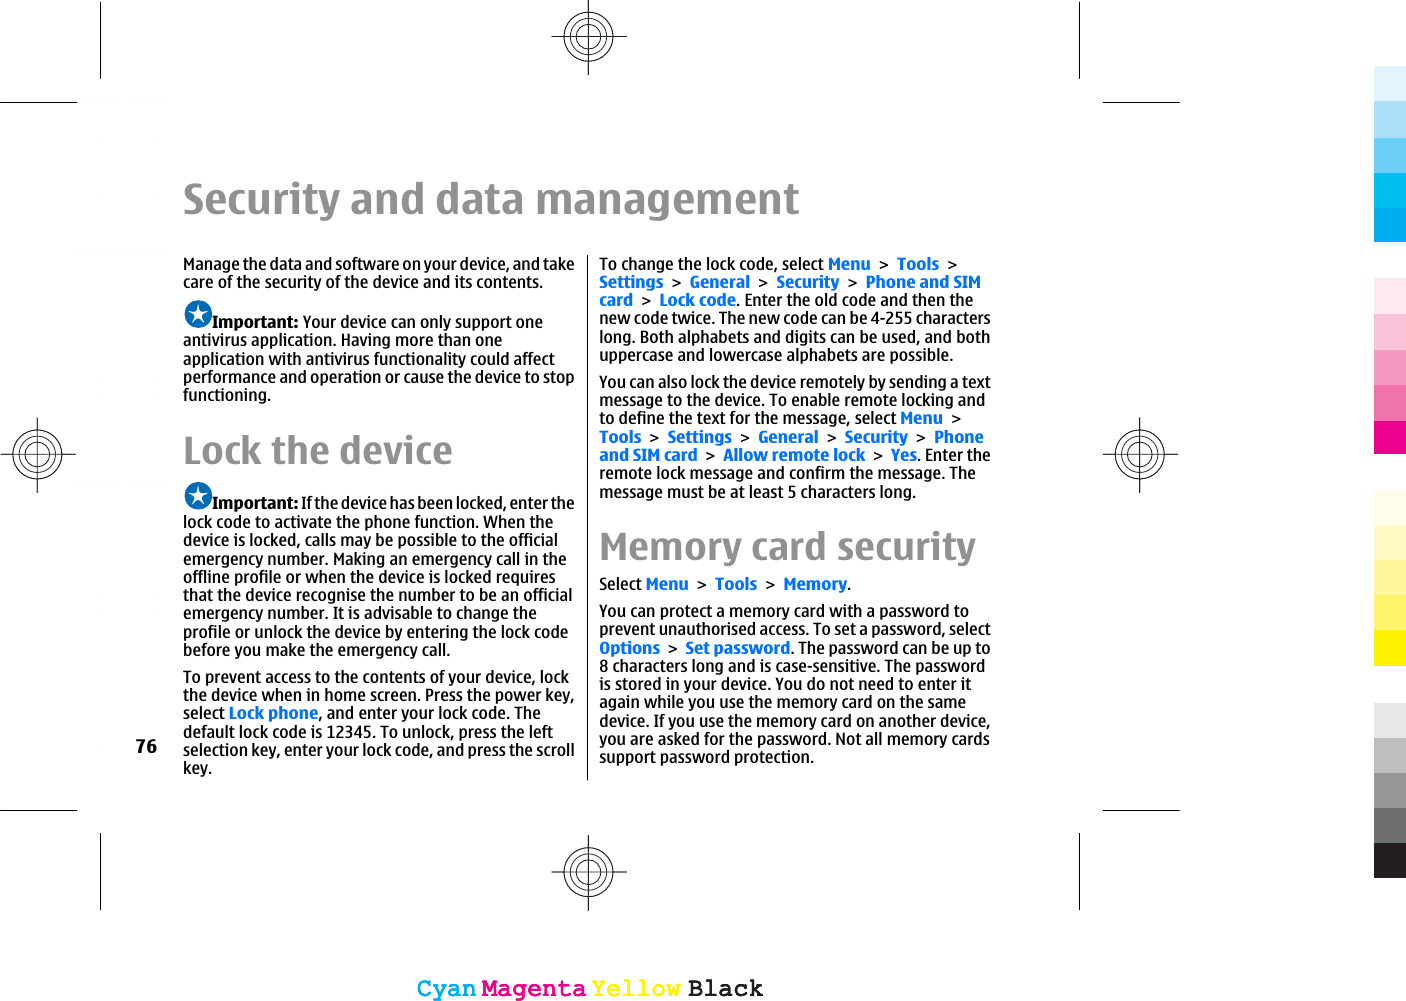 Security and data managementManage the data and software on your device, and takecare of the security of the device and its contents.Important: Your device can only support oneantivirus application. Having more than oneapplication with antivirus functionality could affectperformance and operation or cause the device to stopfunctioning.Lock the deviceImportant: If the device has been locked, enter thelock code to activate the phone function. When thedevice is locked, calls may be possible to the officialemergency number. Making an emergency call in theoffline profile or when the device is locked requiresthat the device recognise the number to be an officialemergency number. It is advisable to change theprofile or unlock the device by entering the lock codebefore you make the emergency call.To prevent access to the contents of your device, lockthe device when in home screen. Press the power key,select Lock phone, and enter your lock code. Thedefault lock code is 12345. To unlock, press the leftselection key, enter your lock code, and press the scrollkey.To change the lock code, select MenuToolsSettingsGeneralSecurityPhone and SIMcardLock code. Enter the old code and then thenew code twice. The new code can be 4-255 characterslong. Both alphabets and digits can be used, and bothuppercase and lowercase alphabets are possible.You can also lock the device remotely by sending a textmessage to the device. To enable remote locking andto define the text for the message, select MenuToolsSettingsGeneralSecurityPhoneand SIM cardAllow remote lockYes. Enter theremote lock message and confirm the message. Themessage must be at least 5 characters long.Memory card securitySelect MenuToolsMemory.You can protect a memory card with a password toprevent unauthorised access. To set a password, selectOptionsSet password. The password can be up to8 characters long and is case-sensitive. The passwordis stored in your device. You do not need to enter itagain while you use the memory card on the samedevice. If you use the memory card on another device,you are asked for the password. Not all memory cardssupport password protection.76CyanCyanMagentaMagentaYellowYellowBlackBlackCyanCyanMagentaMagentaYellowYellowBlackBlack